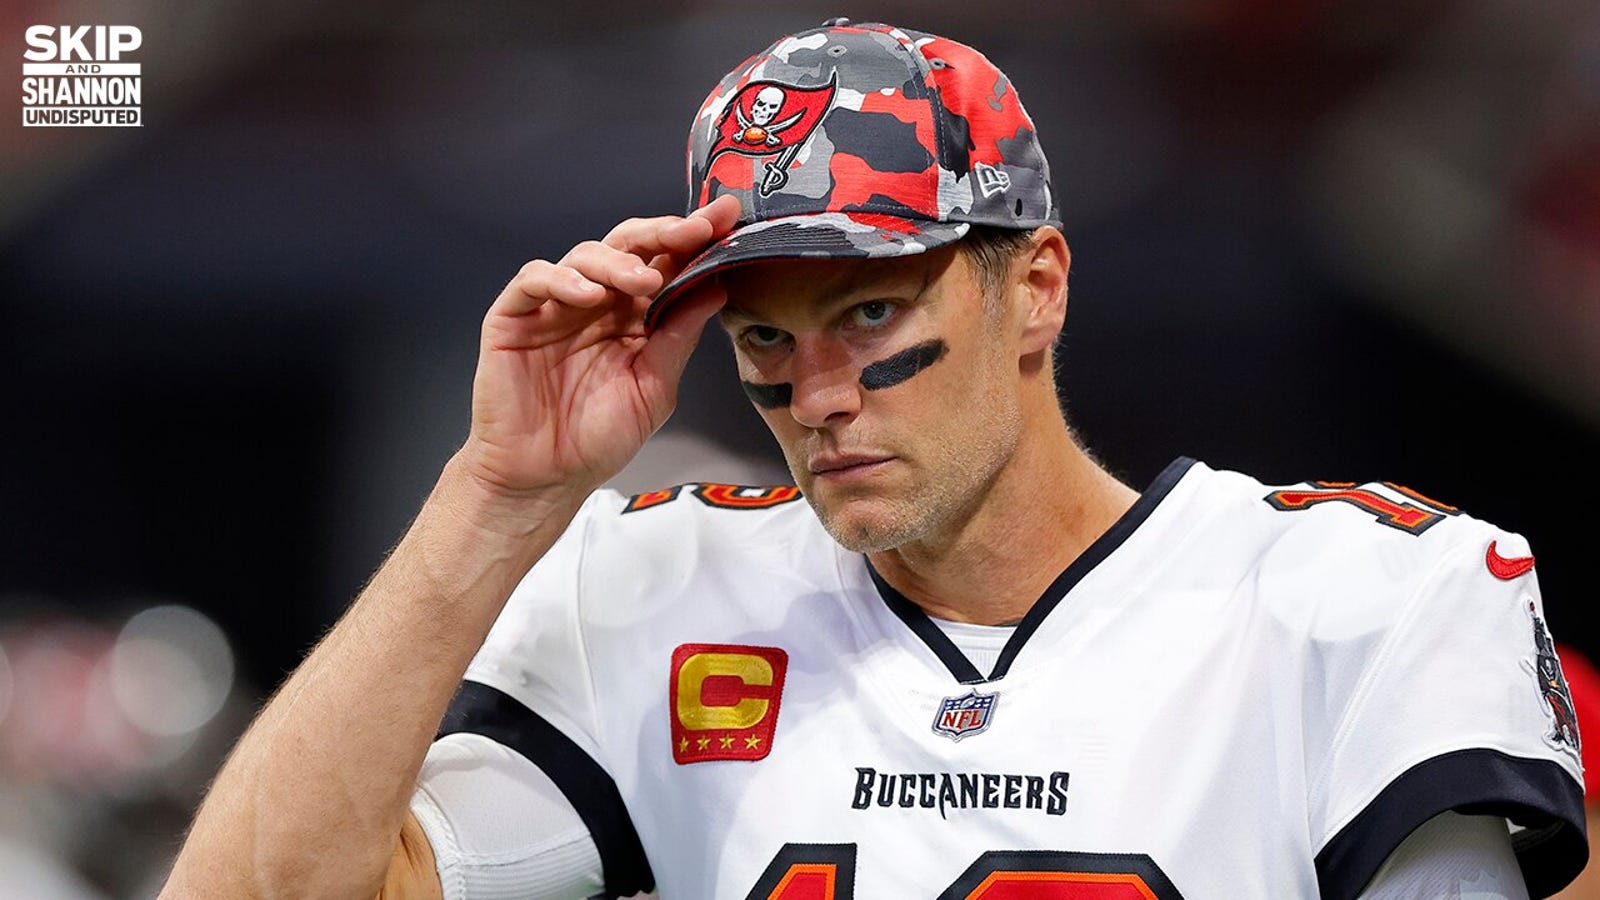 Buccaneers want Tom Brady to return; Raiders, Titans & 49ers among teams interested.